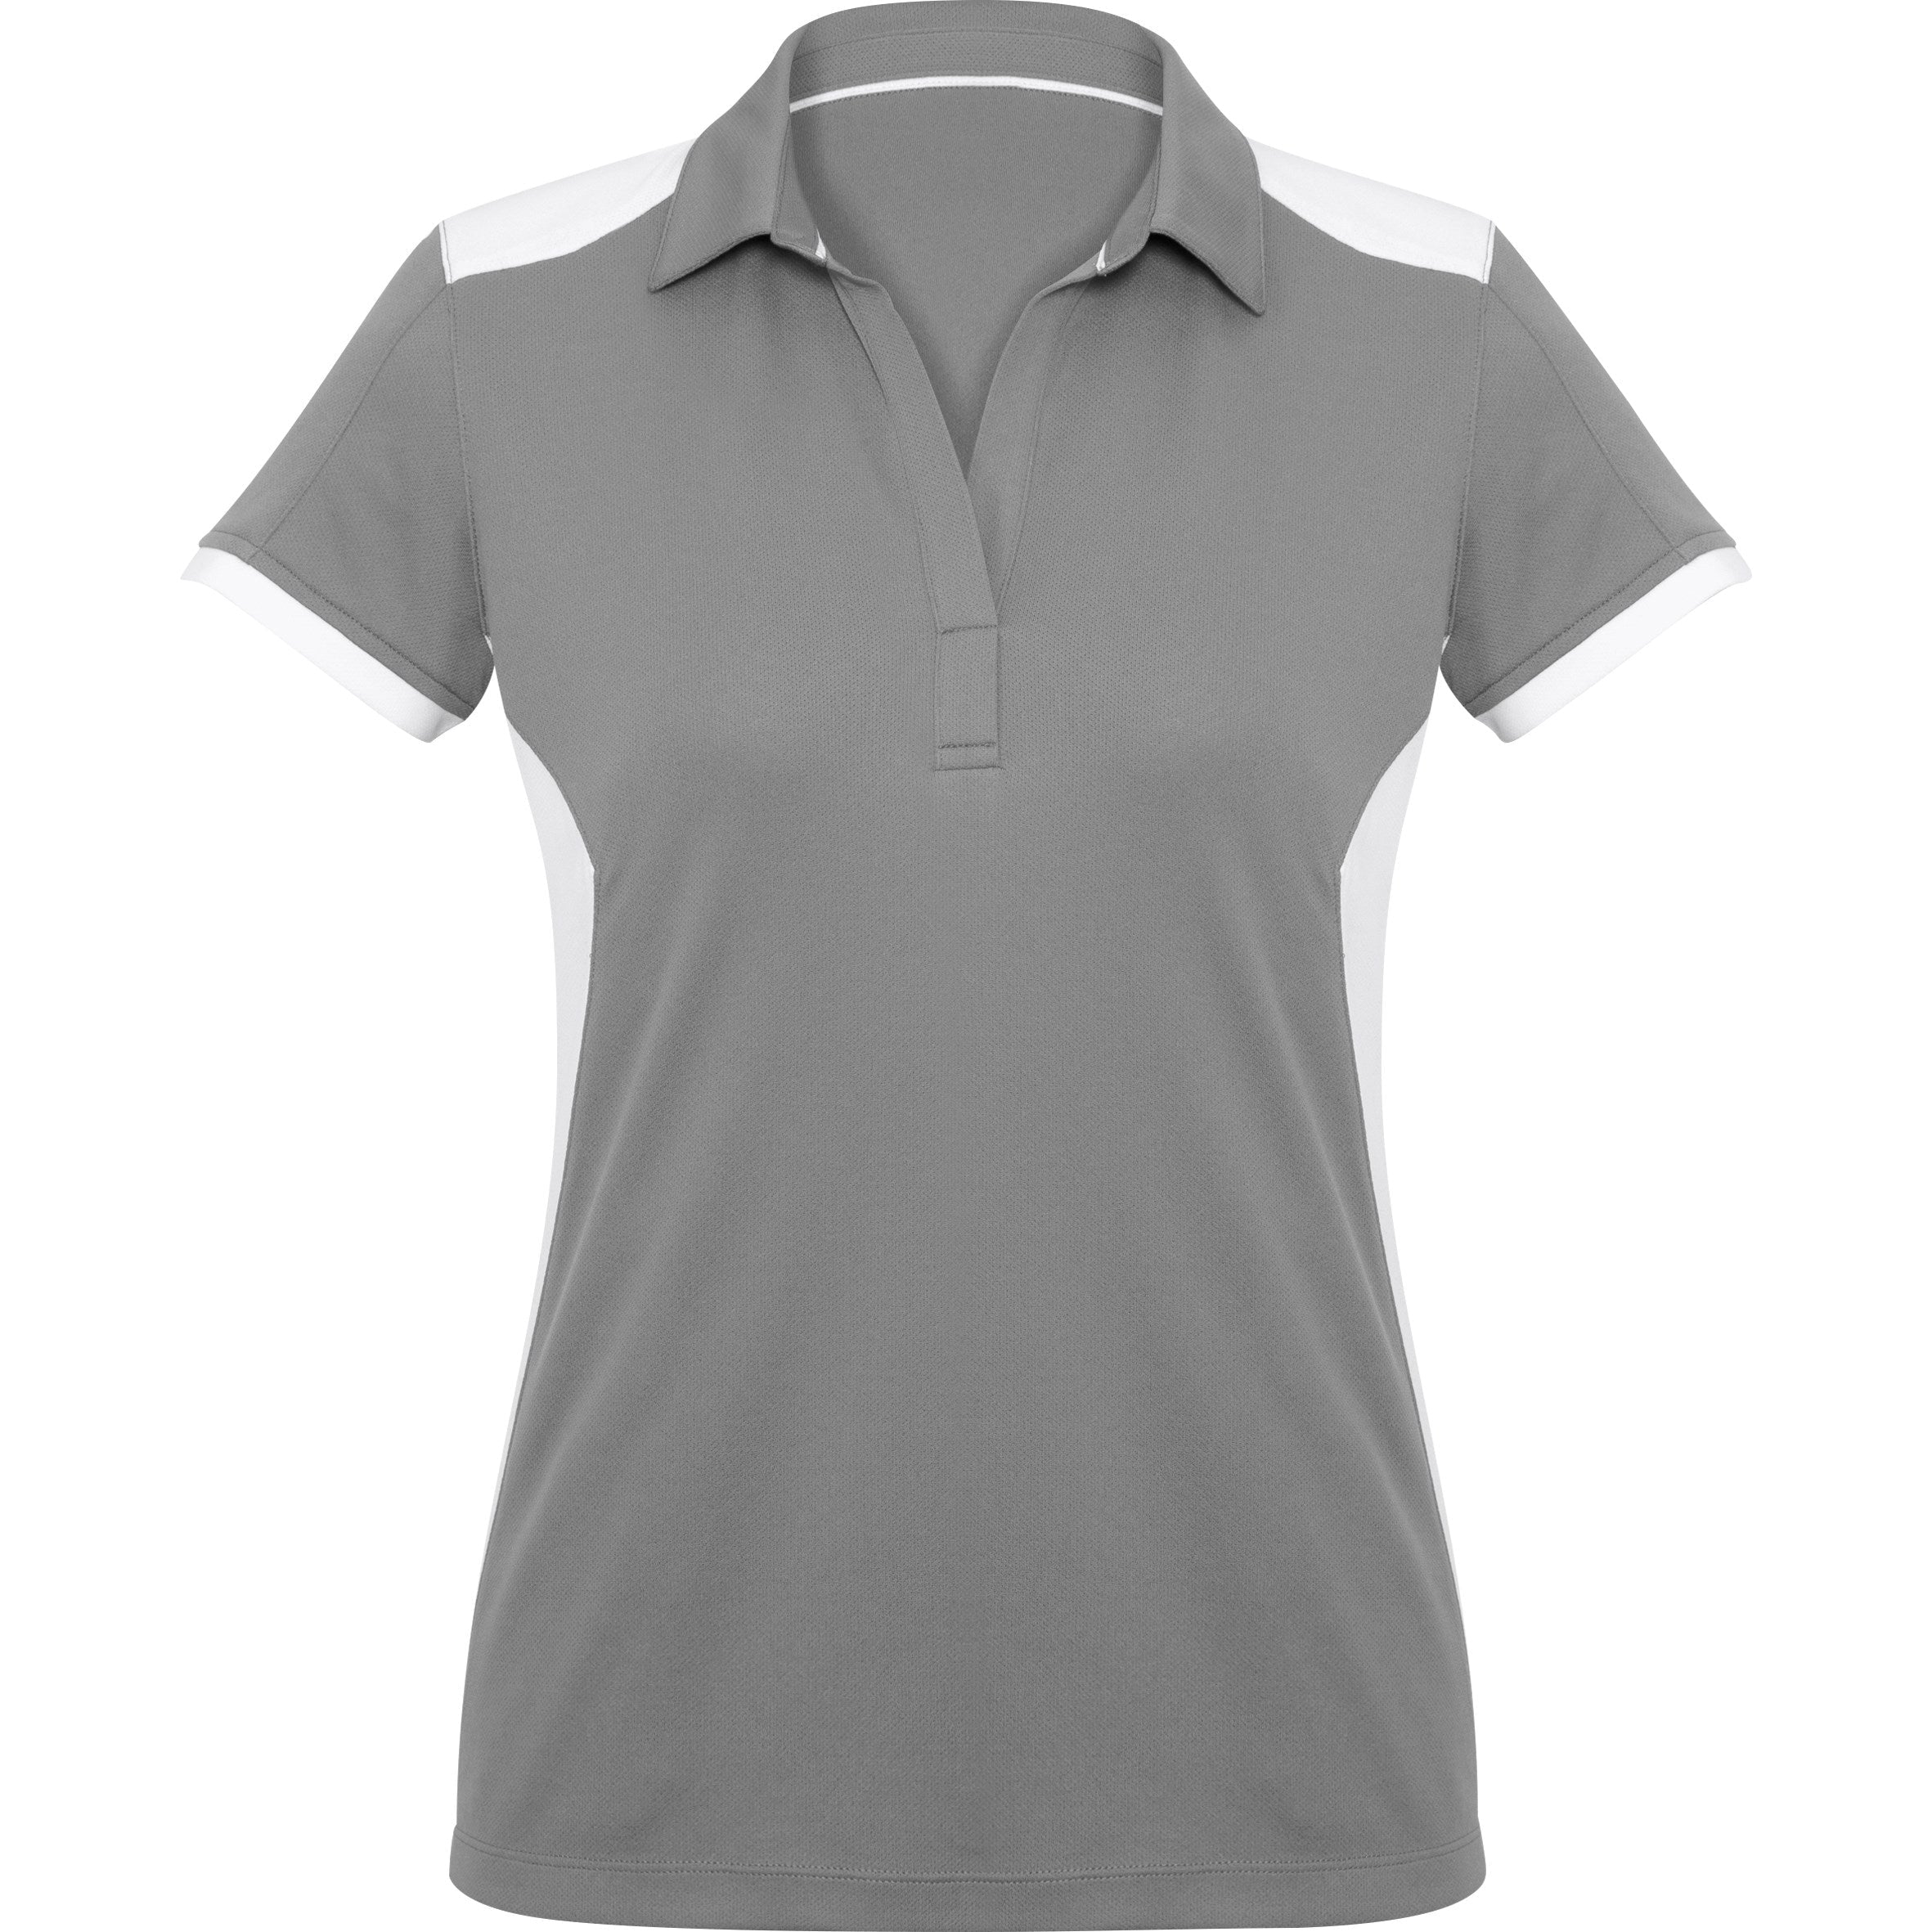 Ladies Rival Golf Shirt - Blue Only-L-Grey with White-GYW